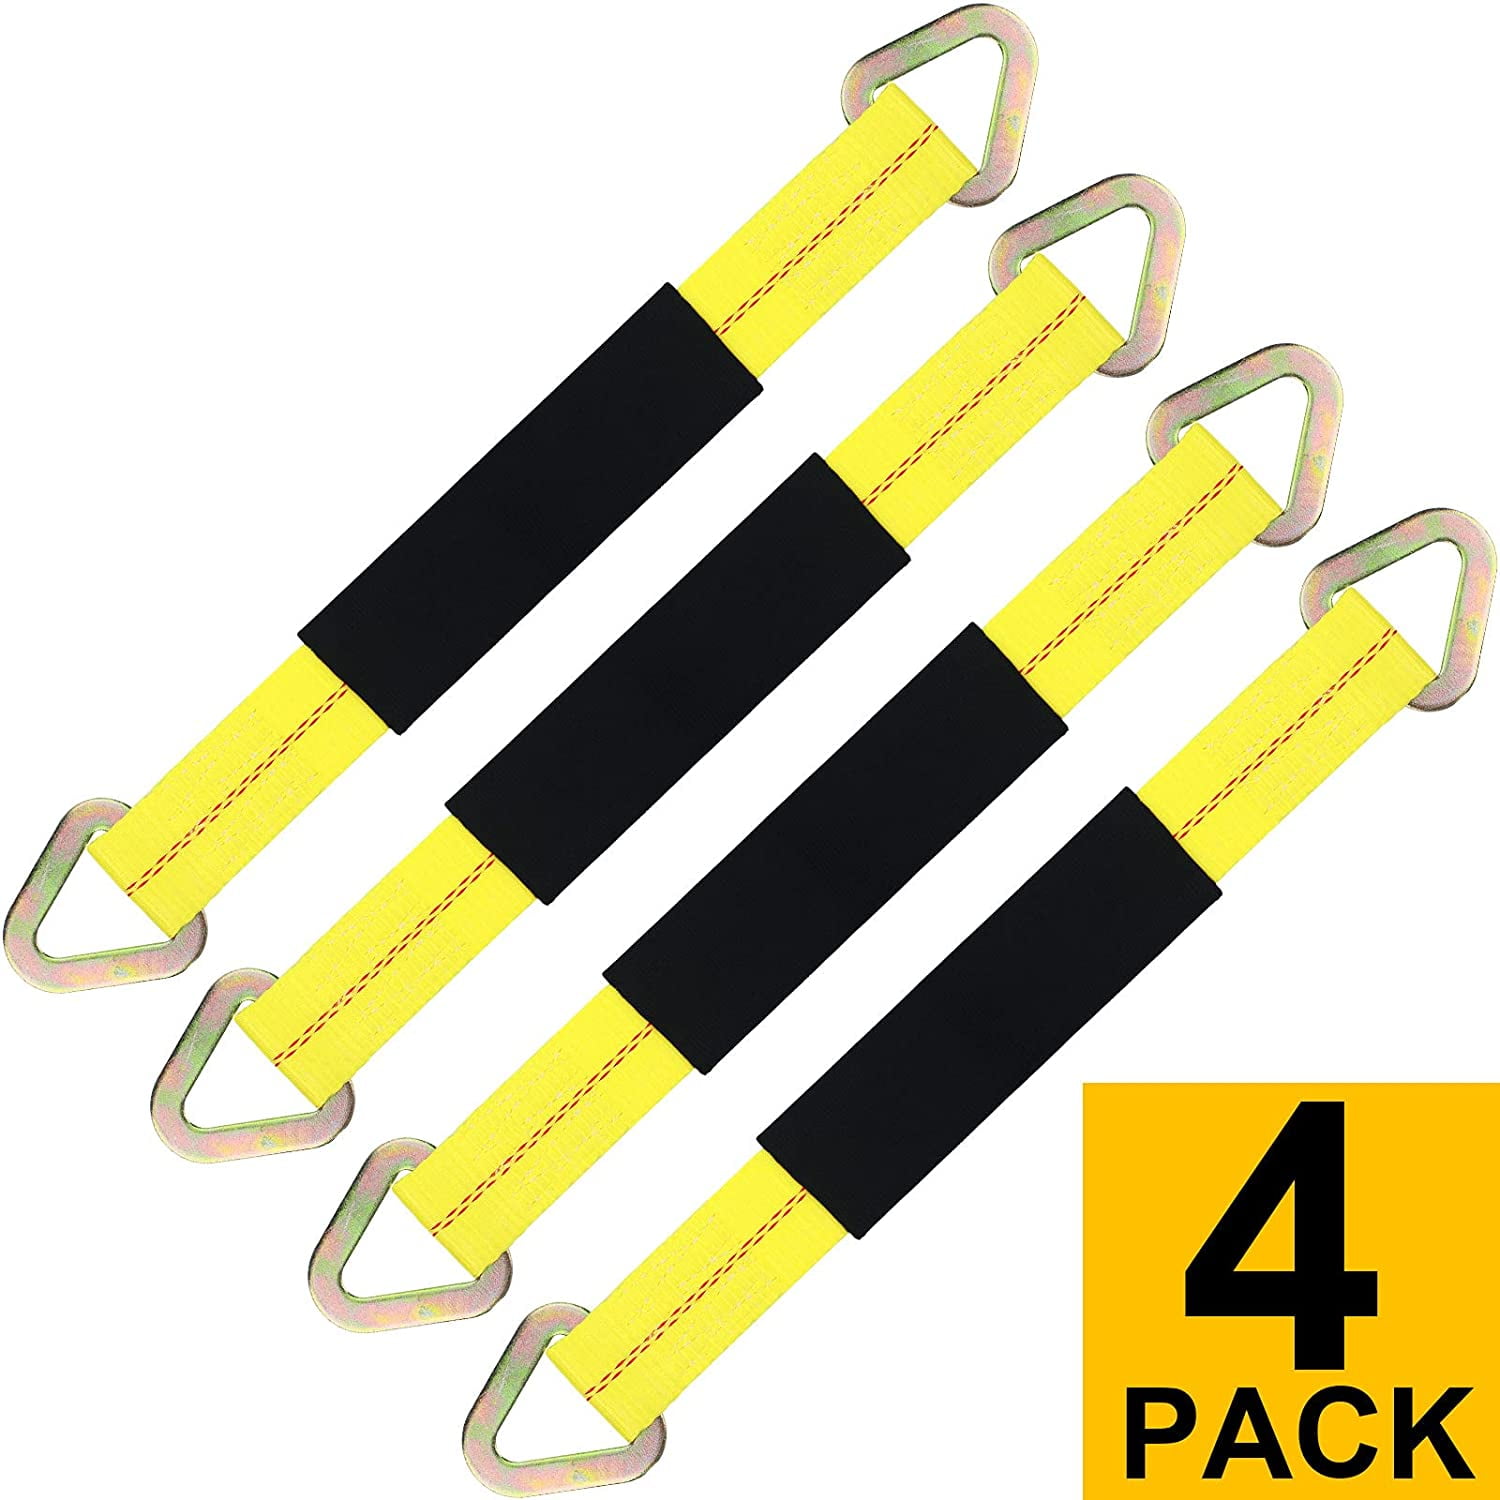 Details about   Axle Straps-4 Pk 24llllx 2llllRobbor Premium Car With D-Ring Protective Sleeve 1 